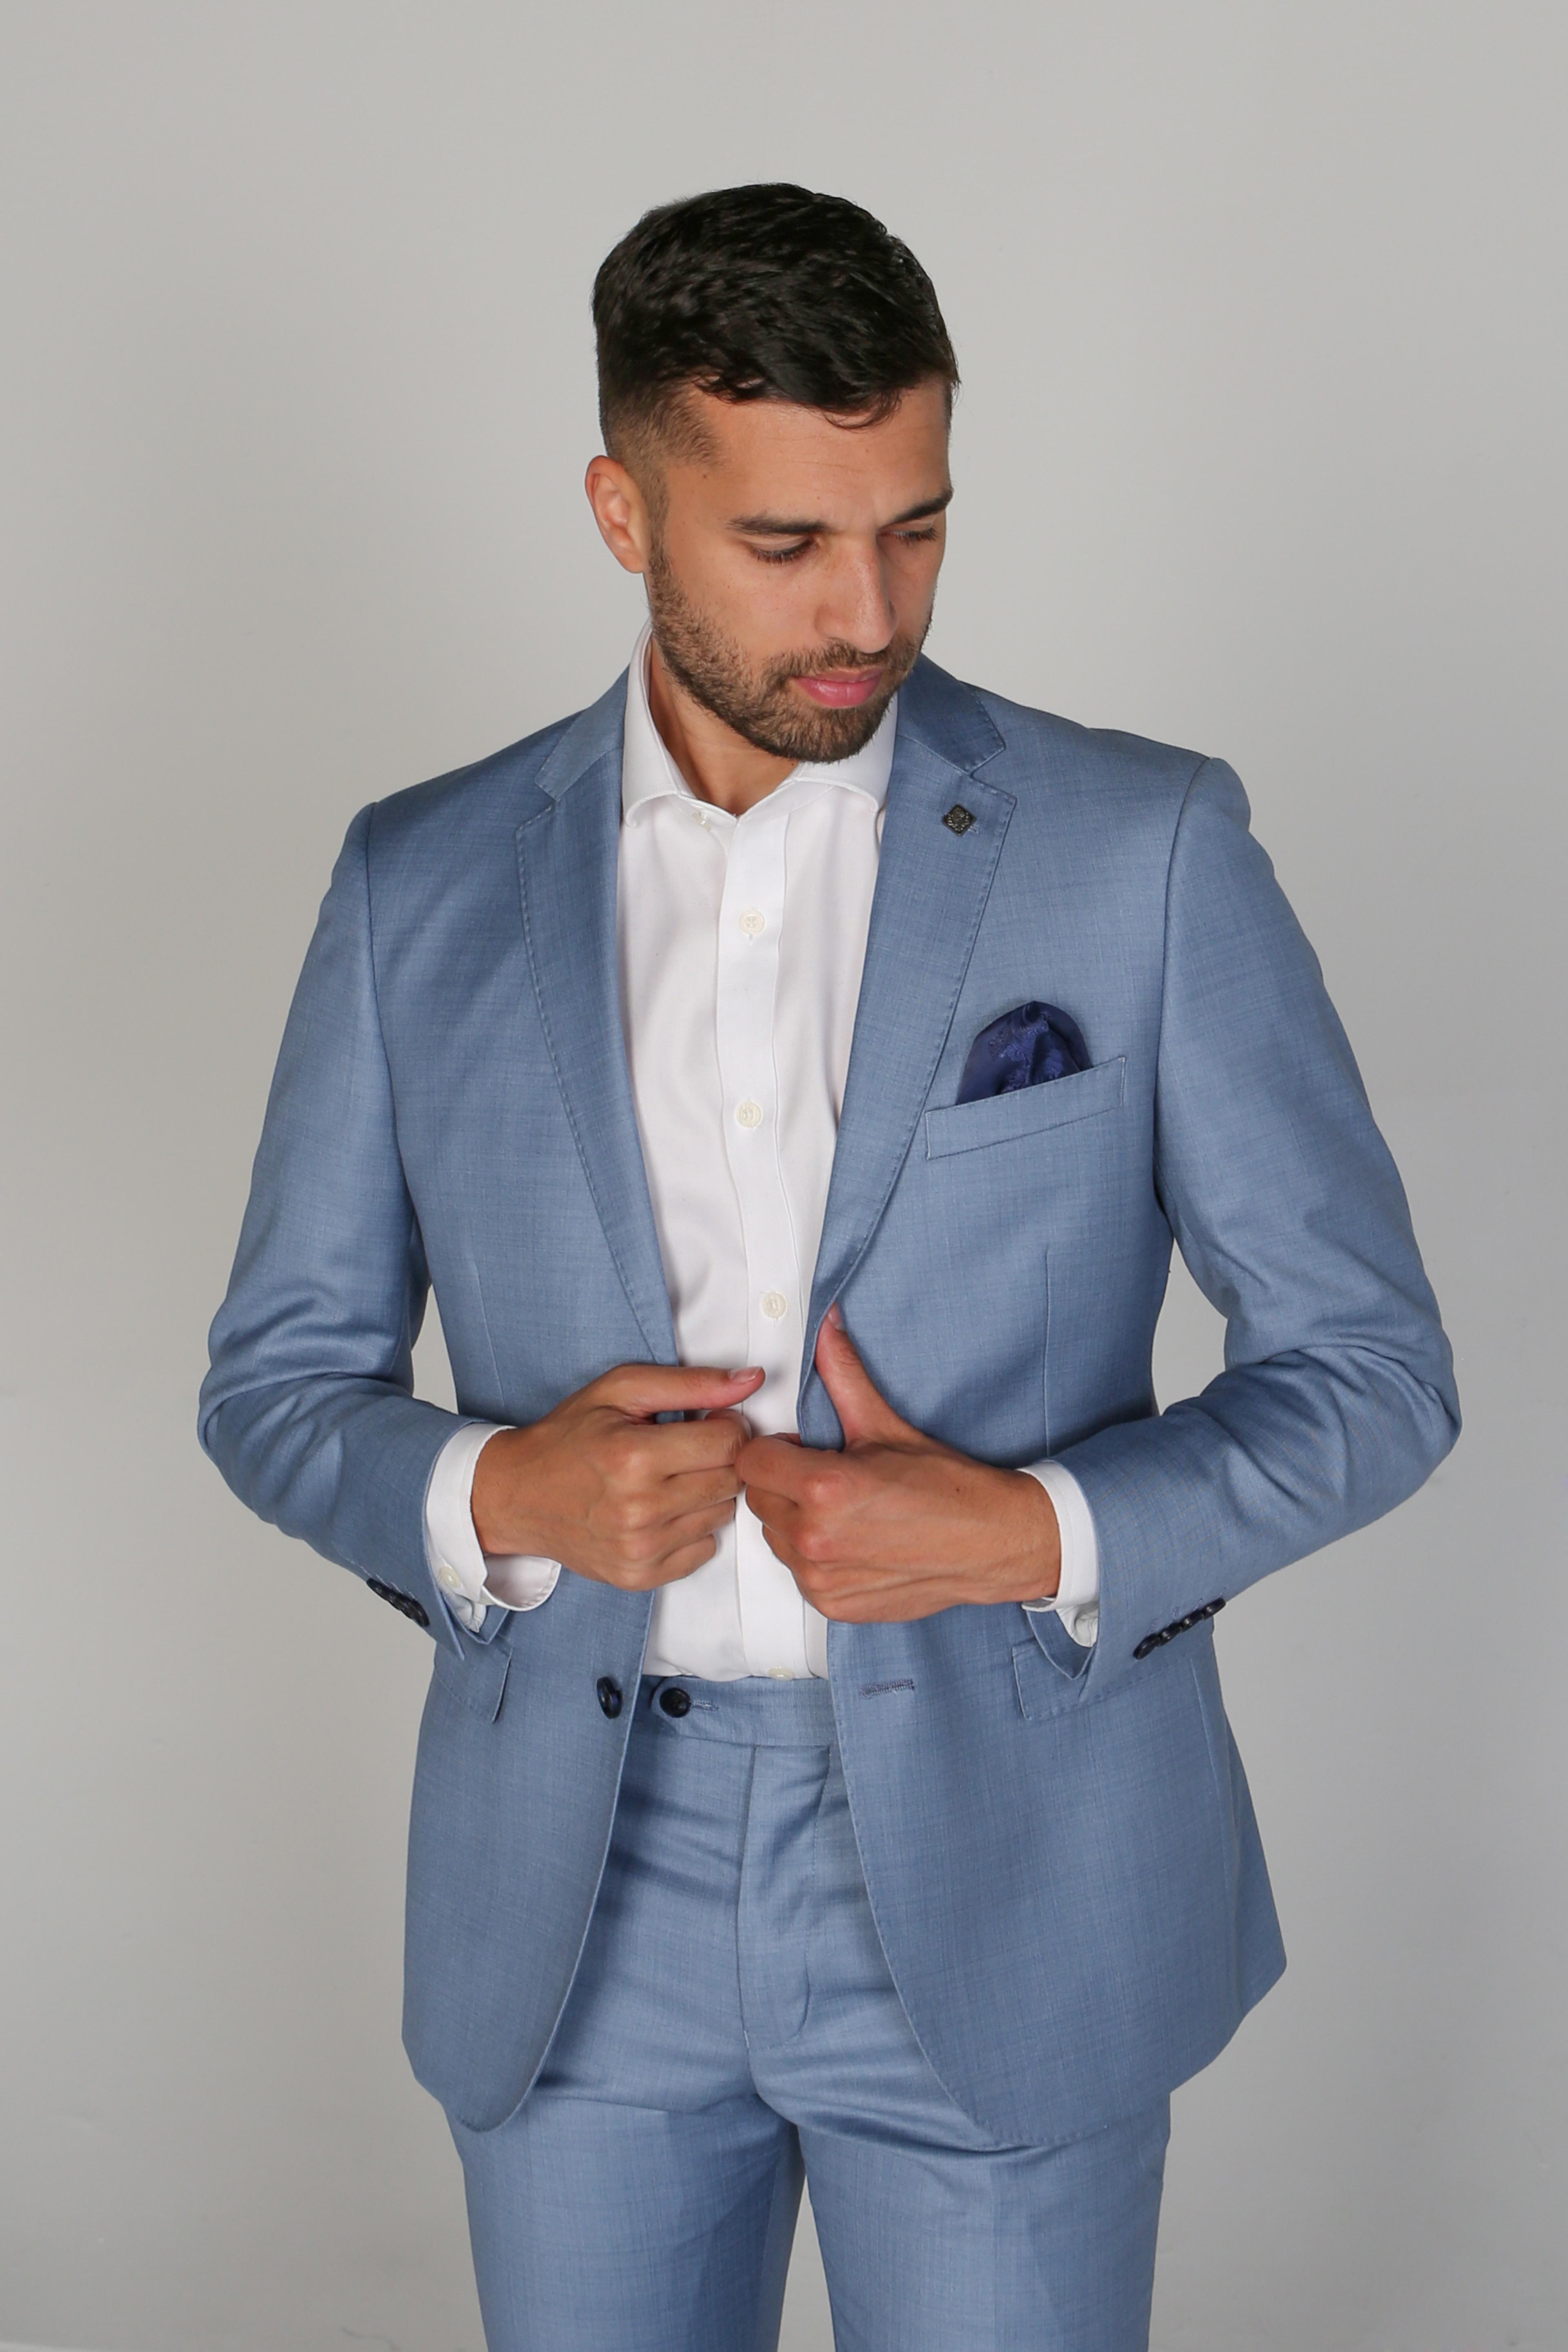 Men's Tailored Fit Formal Suit Jacket  - CHARLES